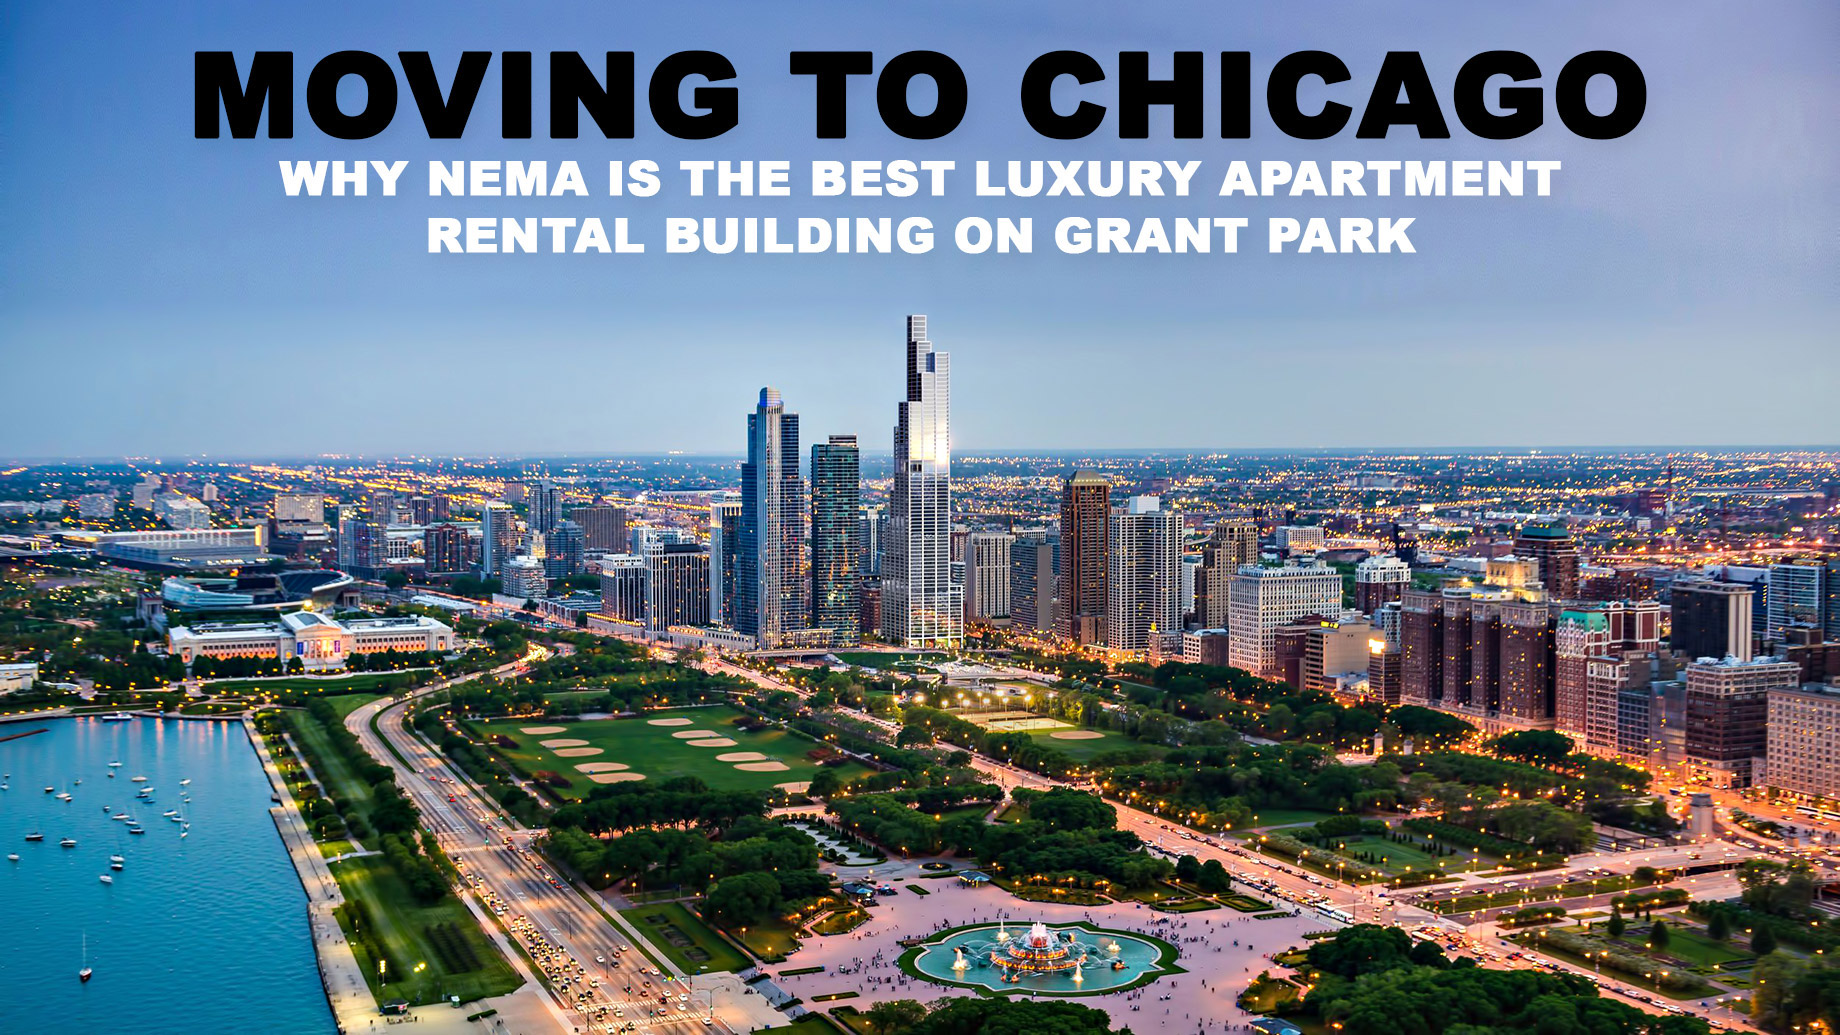 Moving to Chicago – Why NEMA is the Best Luxury Apartment Rental Building on Grant Park